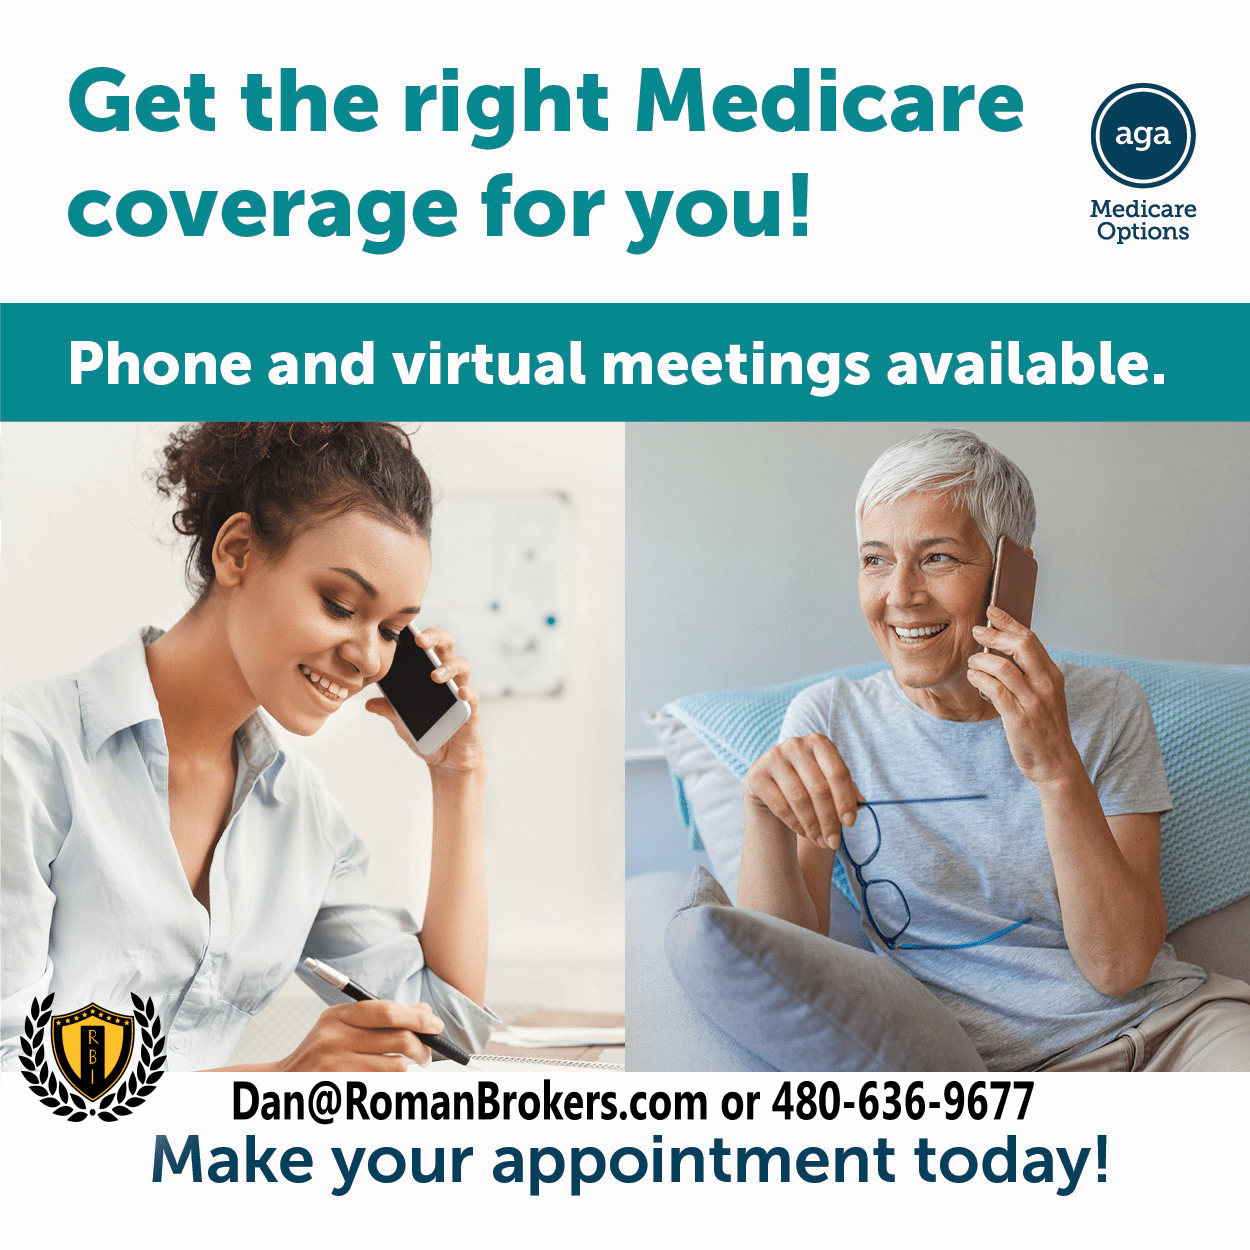 Get Started with Medicare